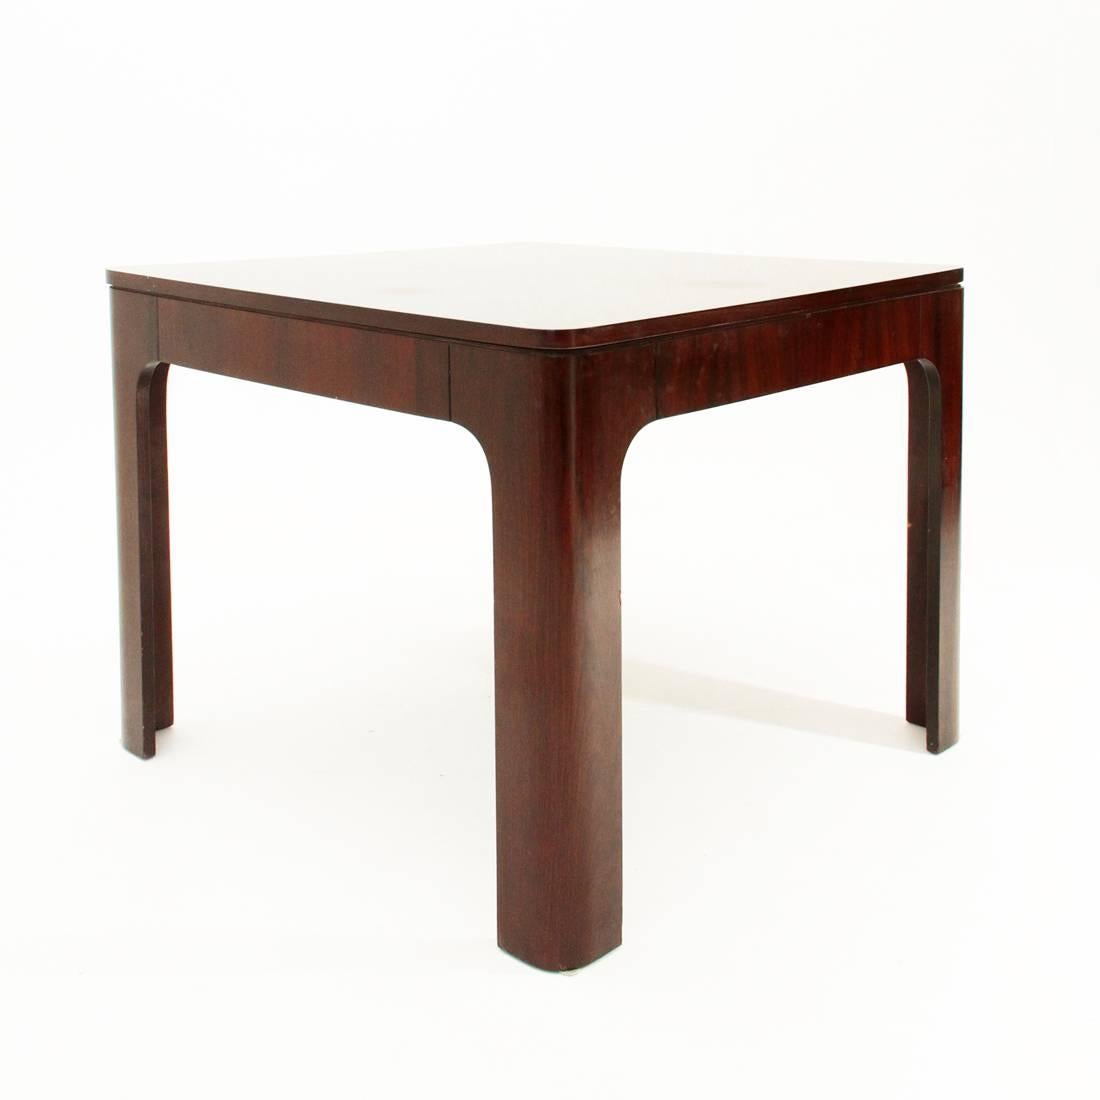 Italian manufacturing table from the 1960s.
Wooden structure in rosewood.
Square plan with rounded edges legs following the floor line.
The plan can be stretched by the presence of an extension, underneath.
Good general conditions, normal usage